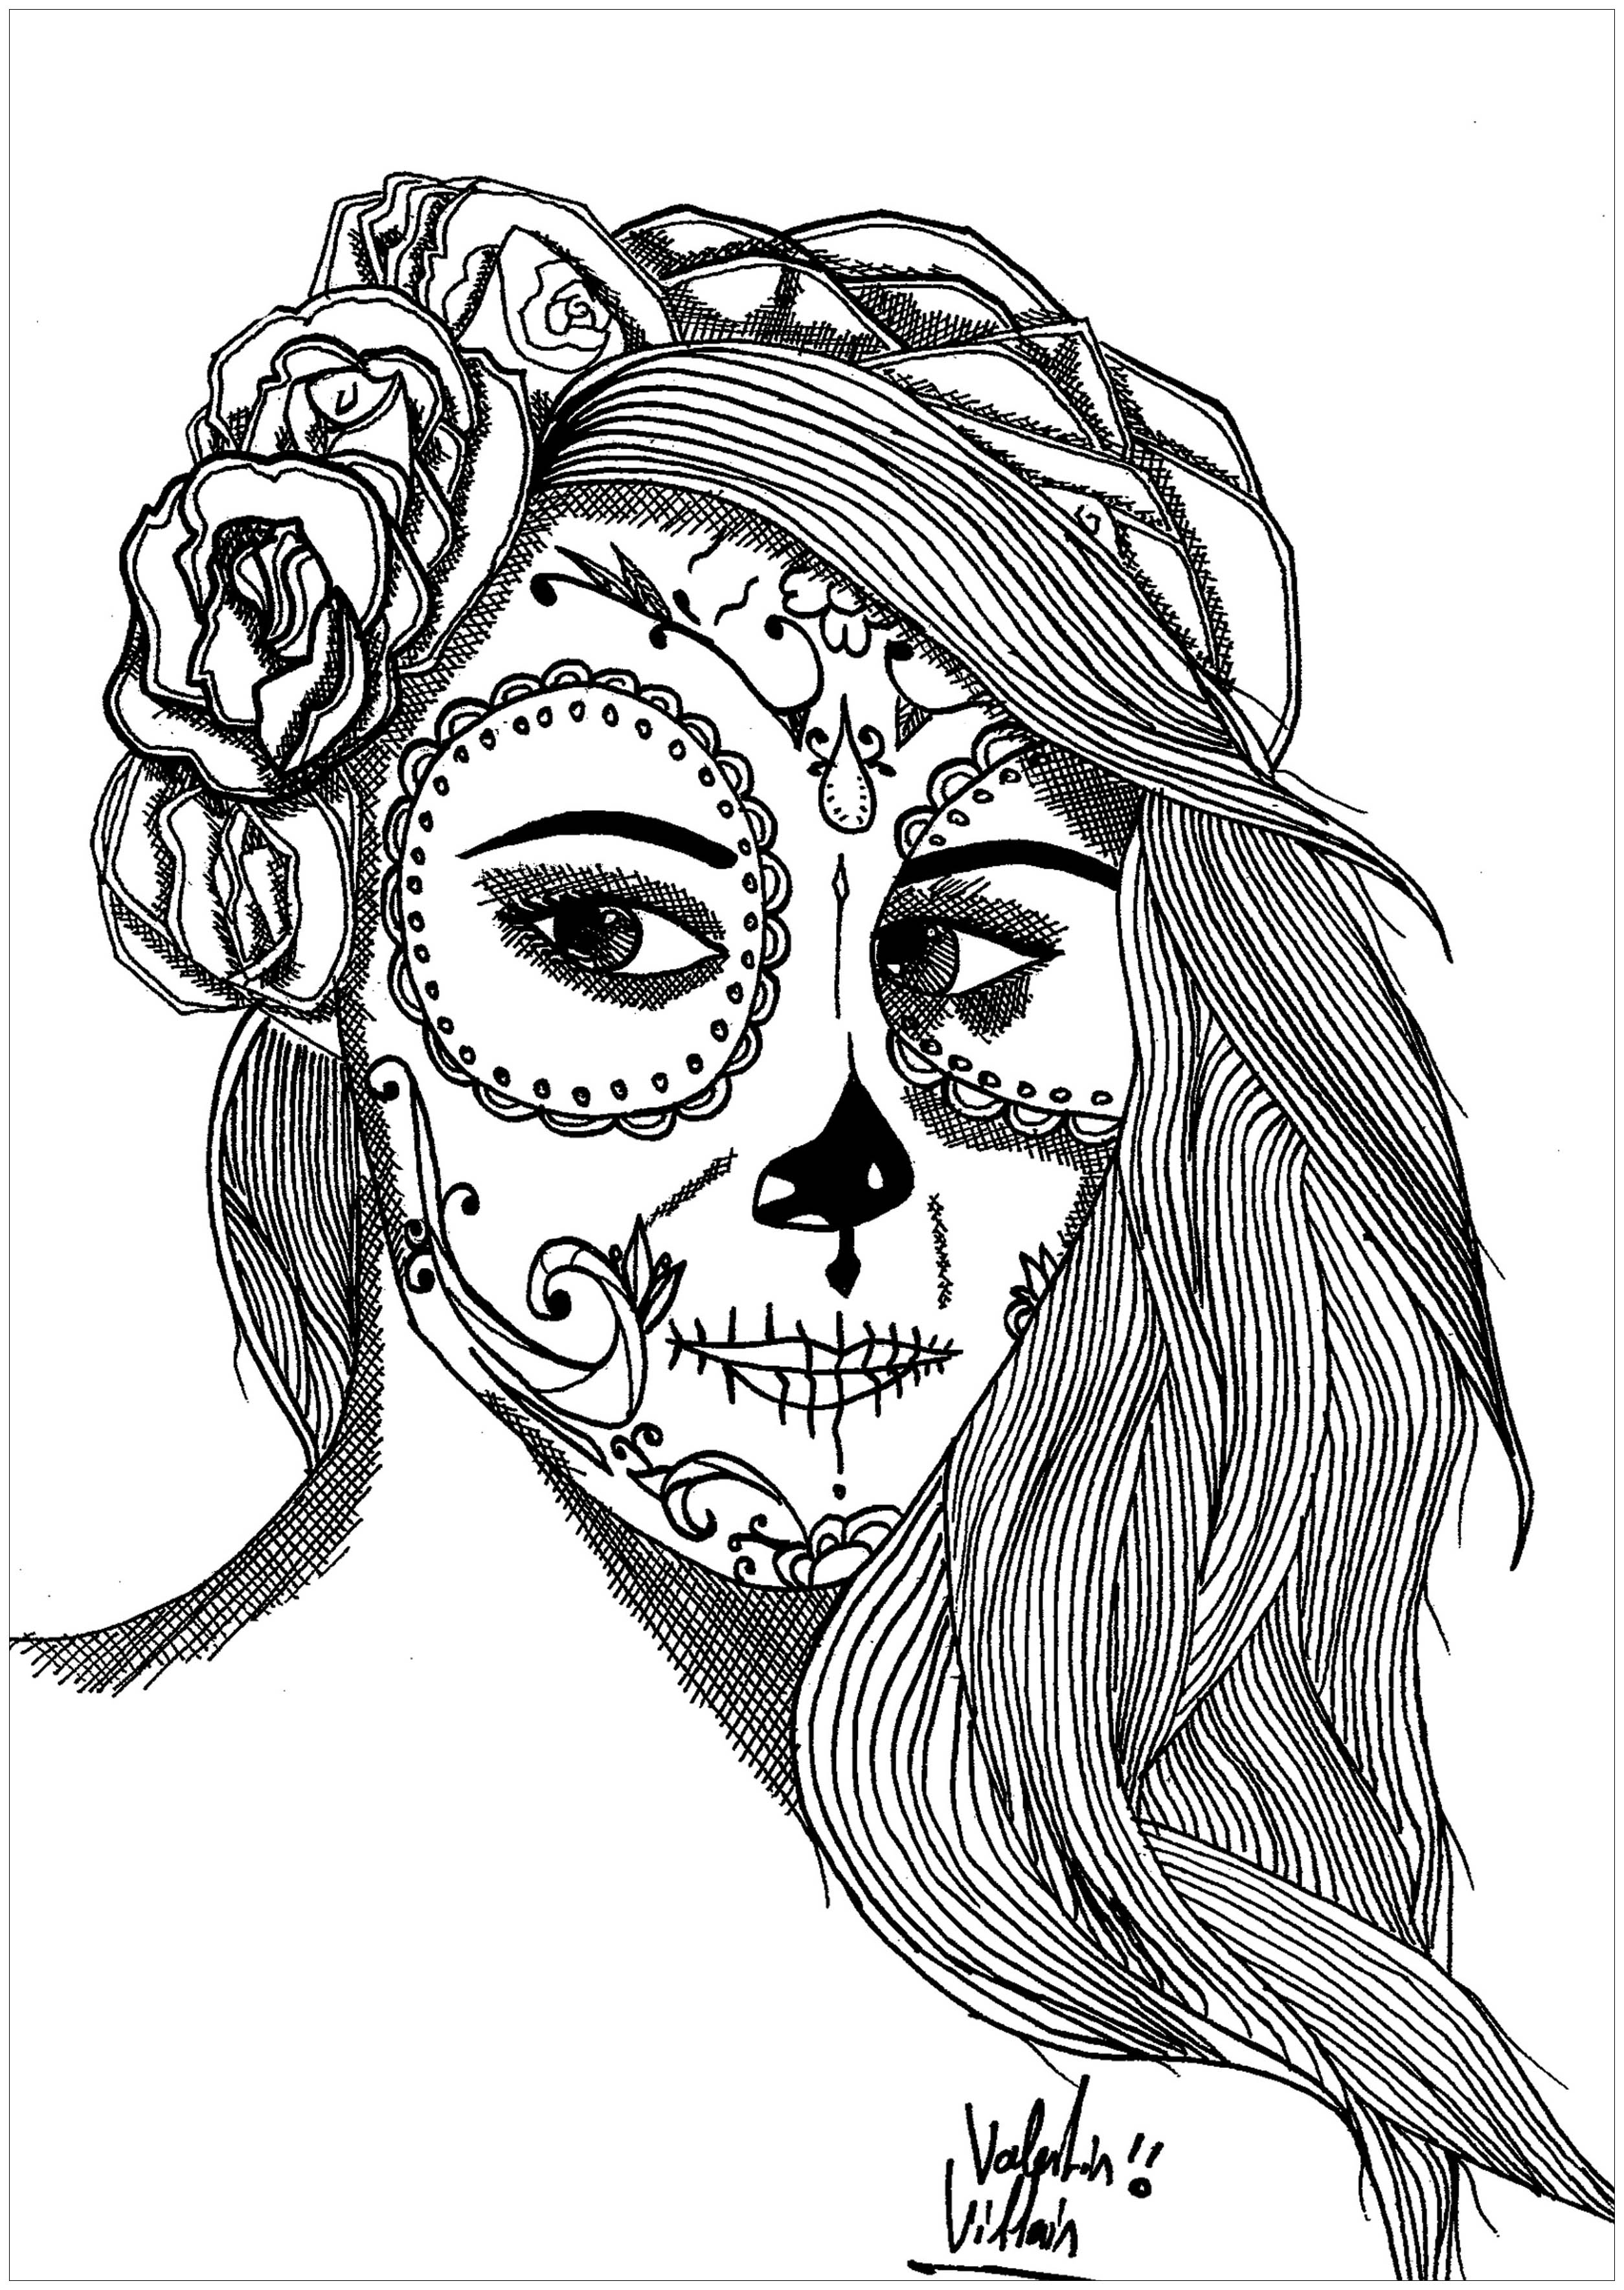 Coloring page representing a woman with a makeup inspired by the Mexican holiday celebrated 'Día de los Muertos'